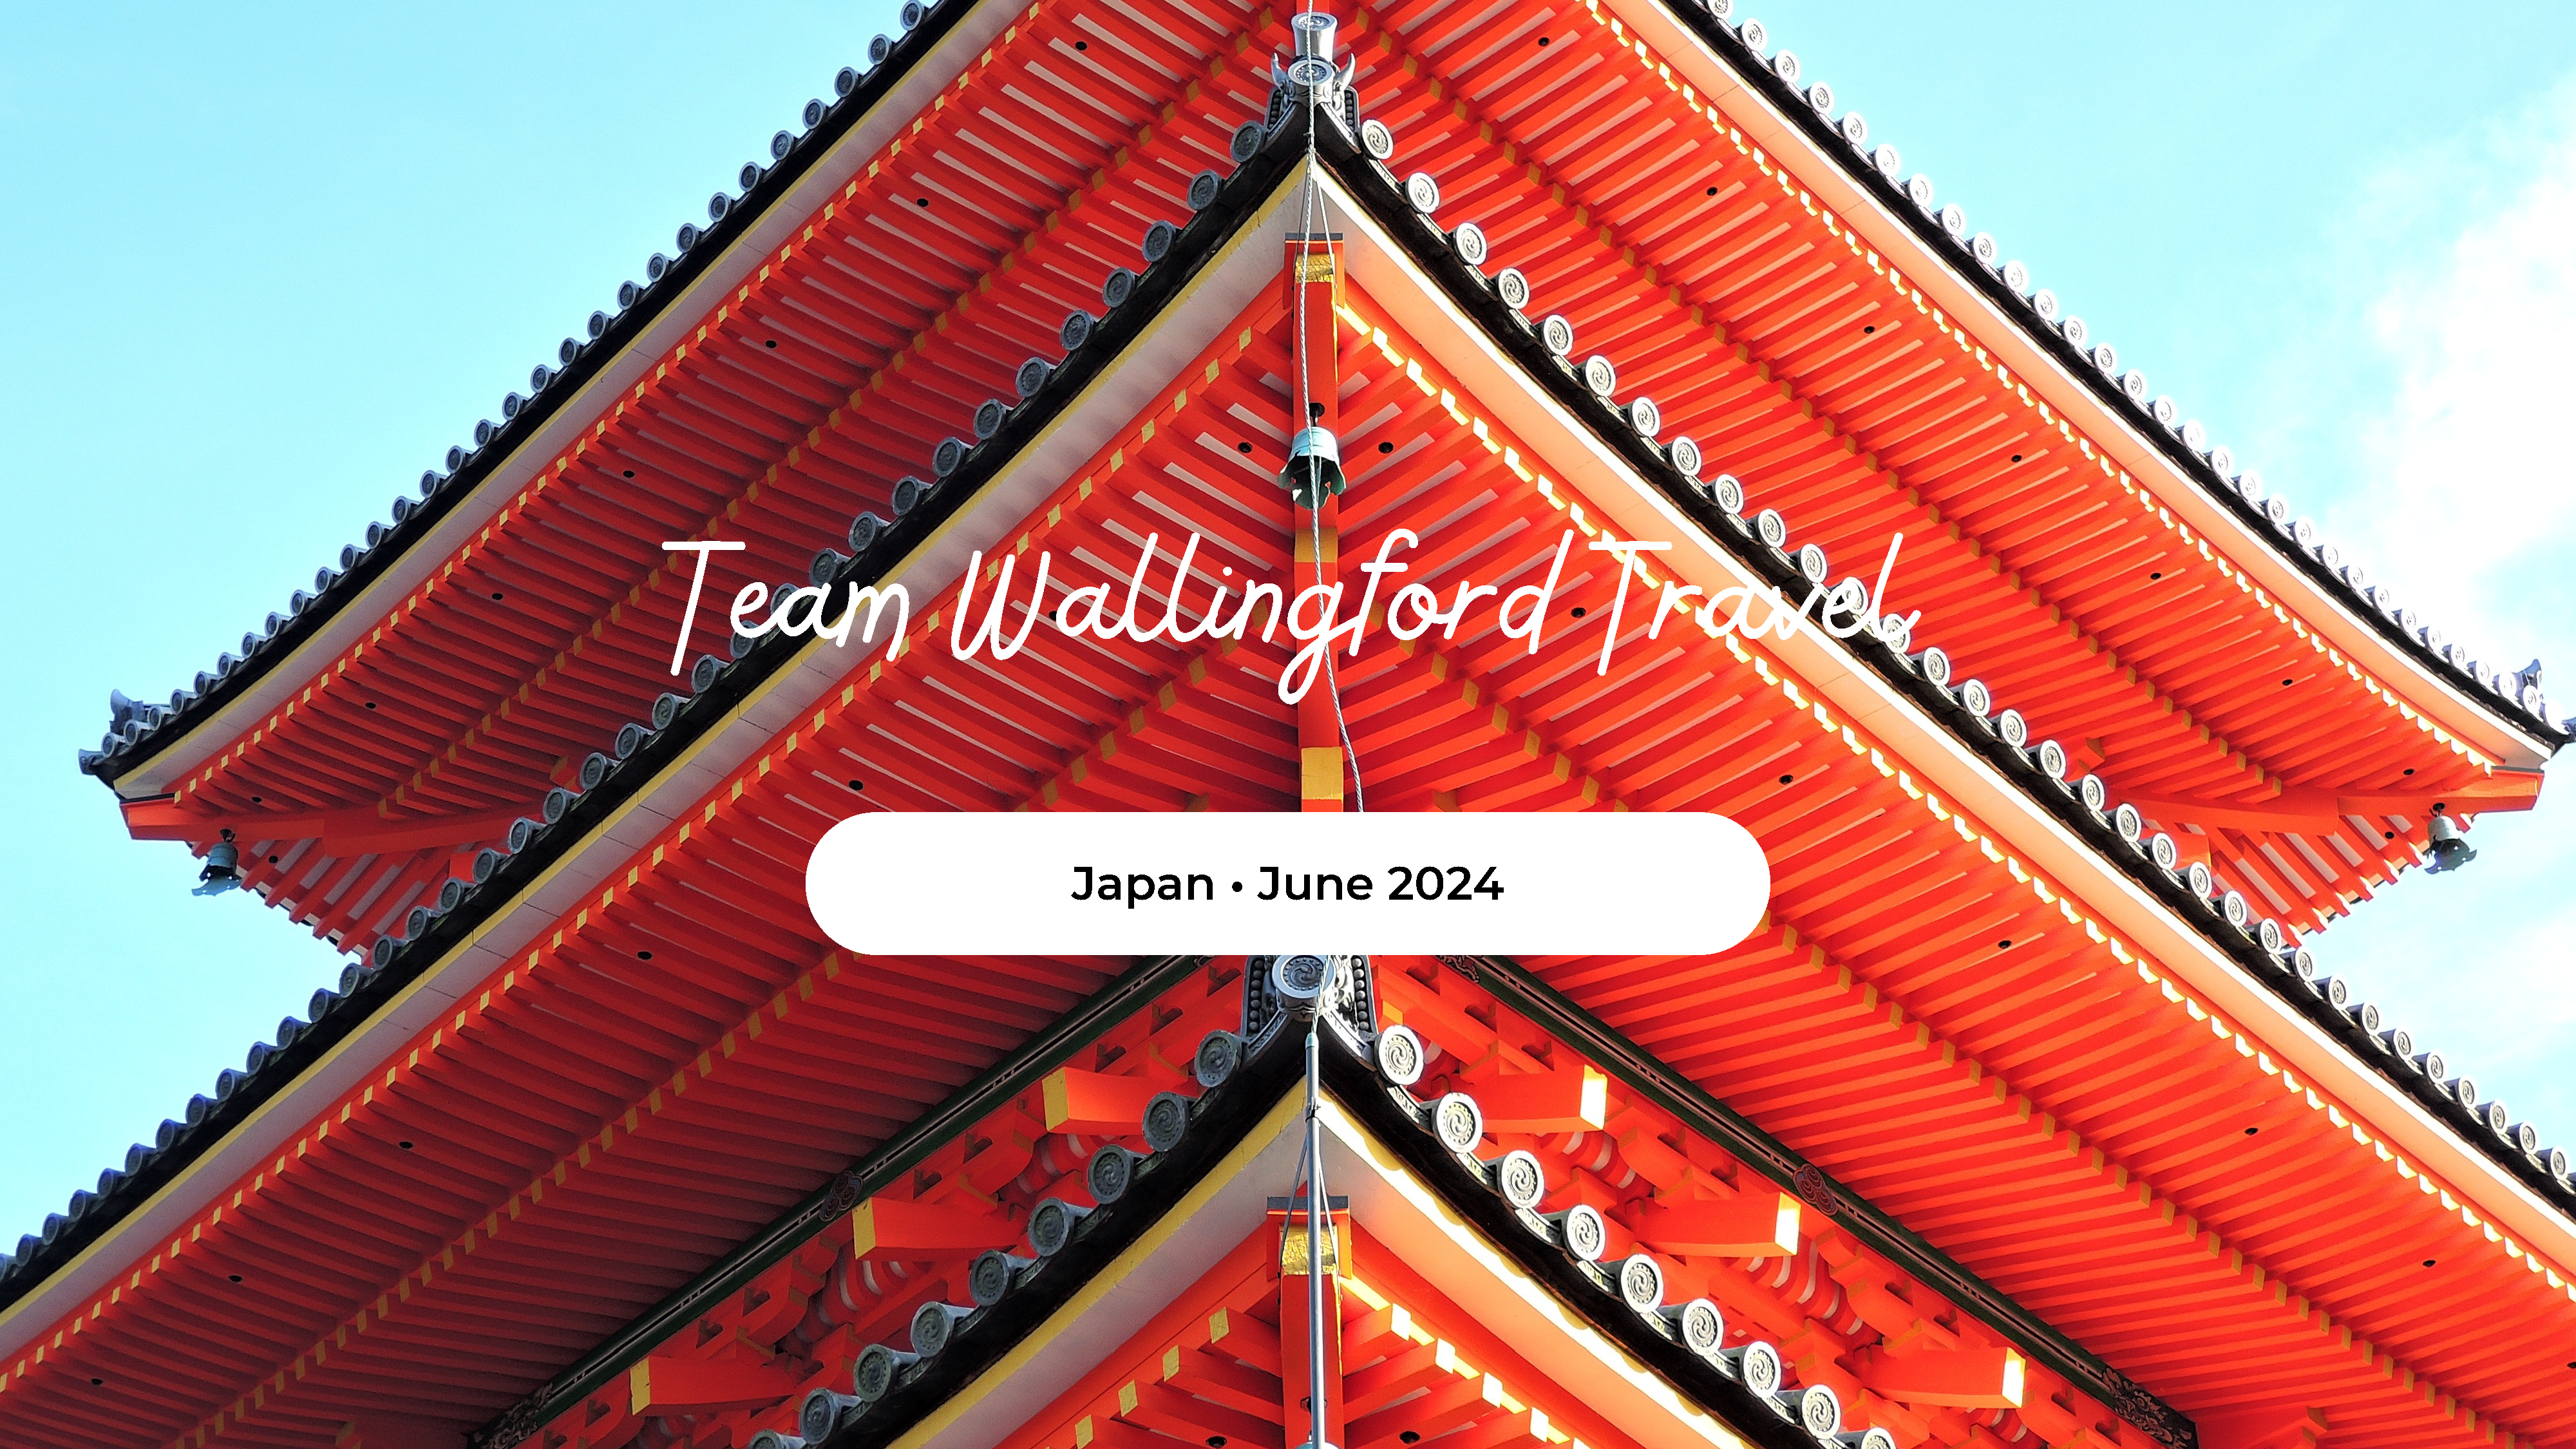 image of a pagoda with the team wallingford travel logo and japan june 2024